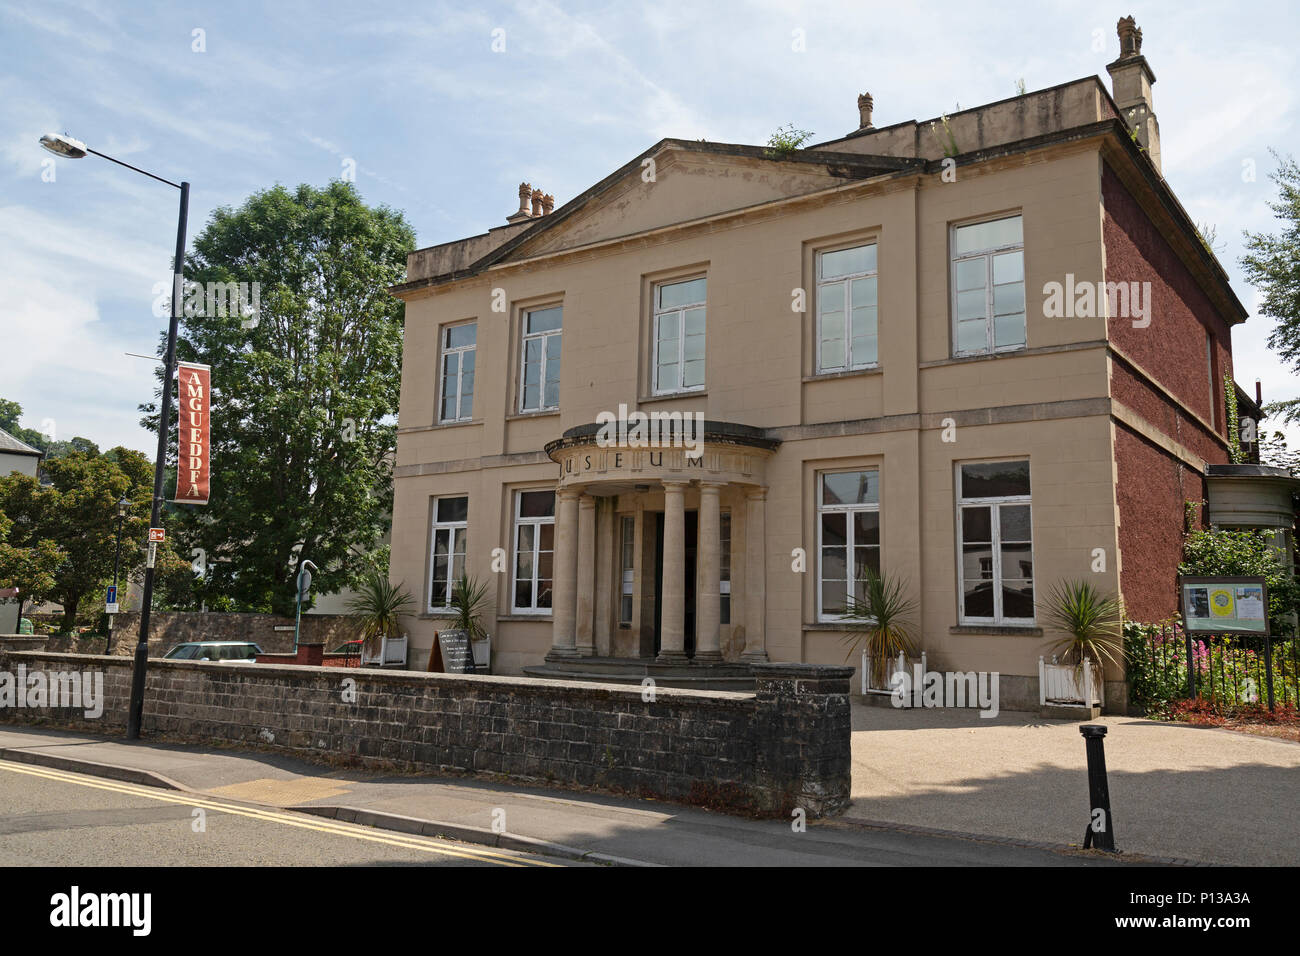 Chepstow Museum, Chepstow, Wales.  It occupies Gwy House, a fine townhouse built in 1796, and previously used as a school and a hospital. Stock Photo